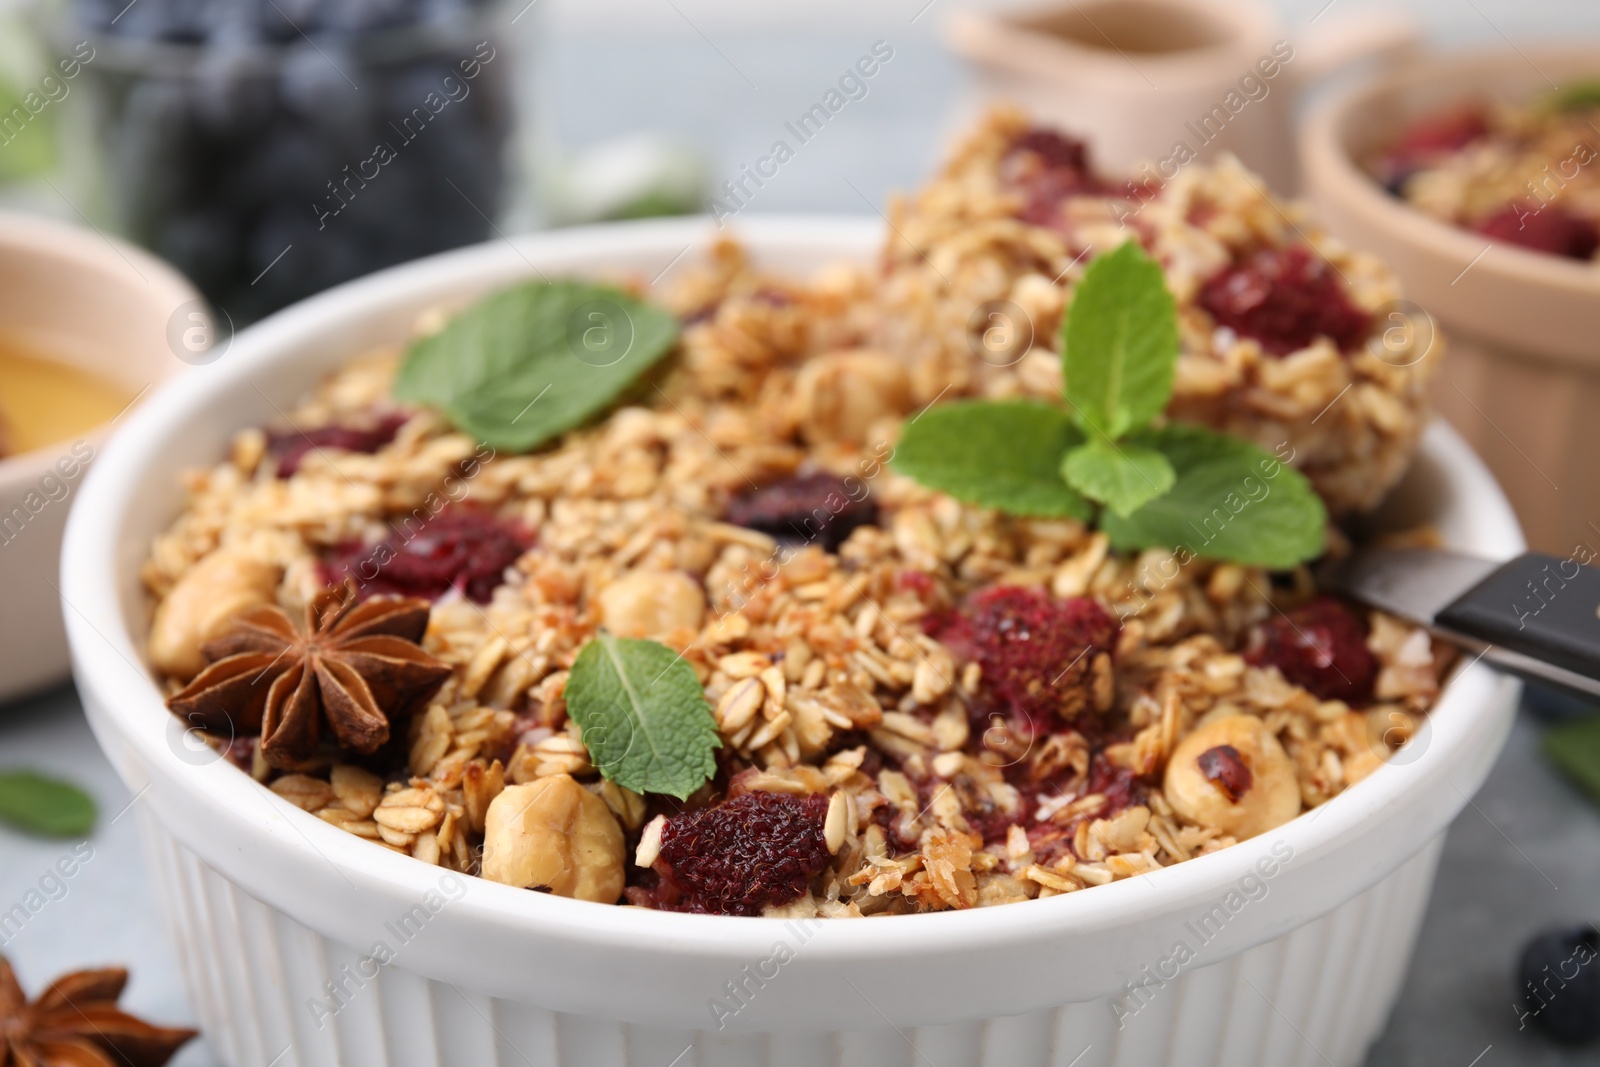 Photo of Tasty baked oatmeal with berries, nuts and anise star on table, closeup